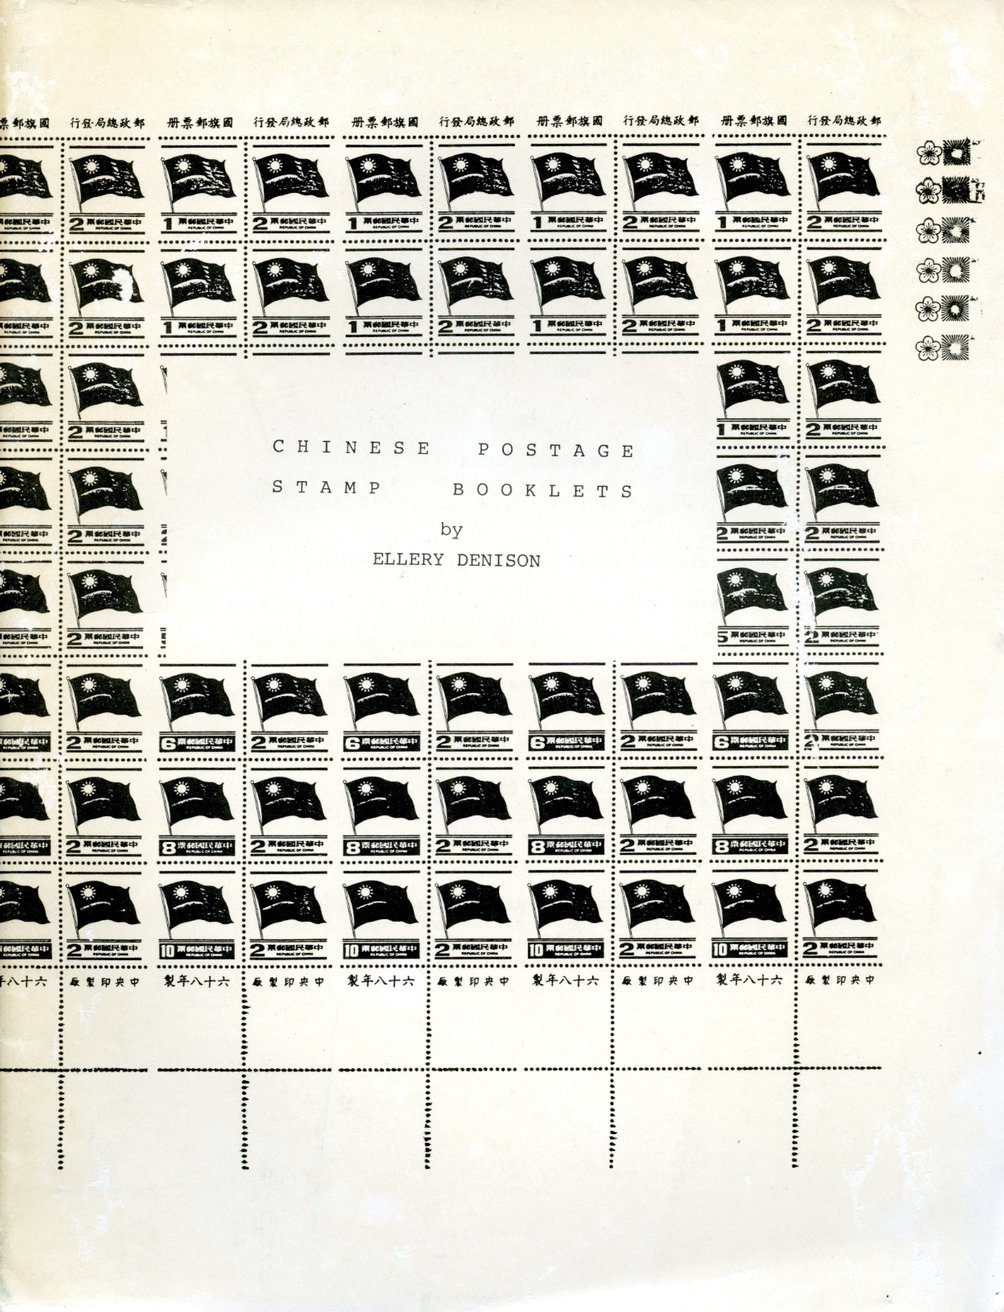 Chinese Postage Stamp Booklets. Ellery Denison. Cover somewhat toned, otherwise in very good condition. (5 oz.)